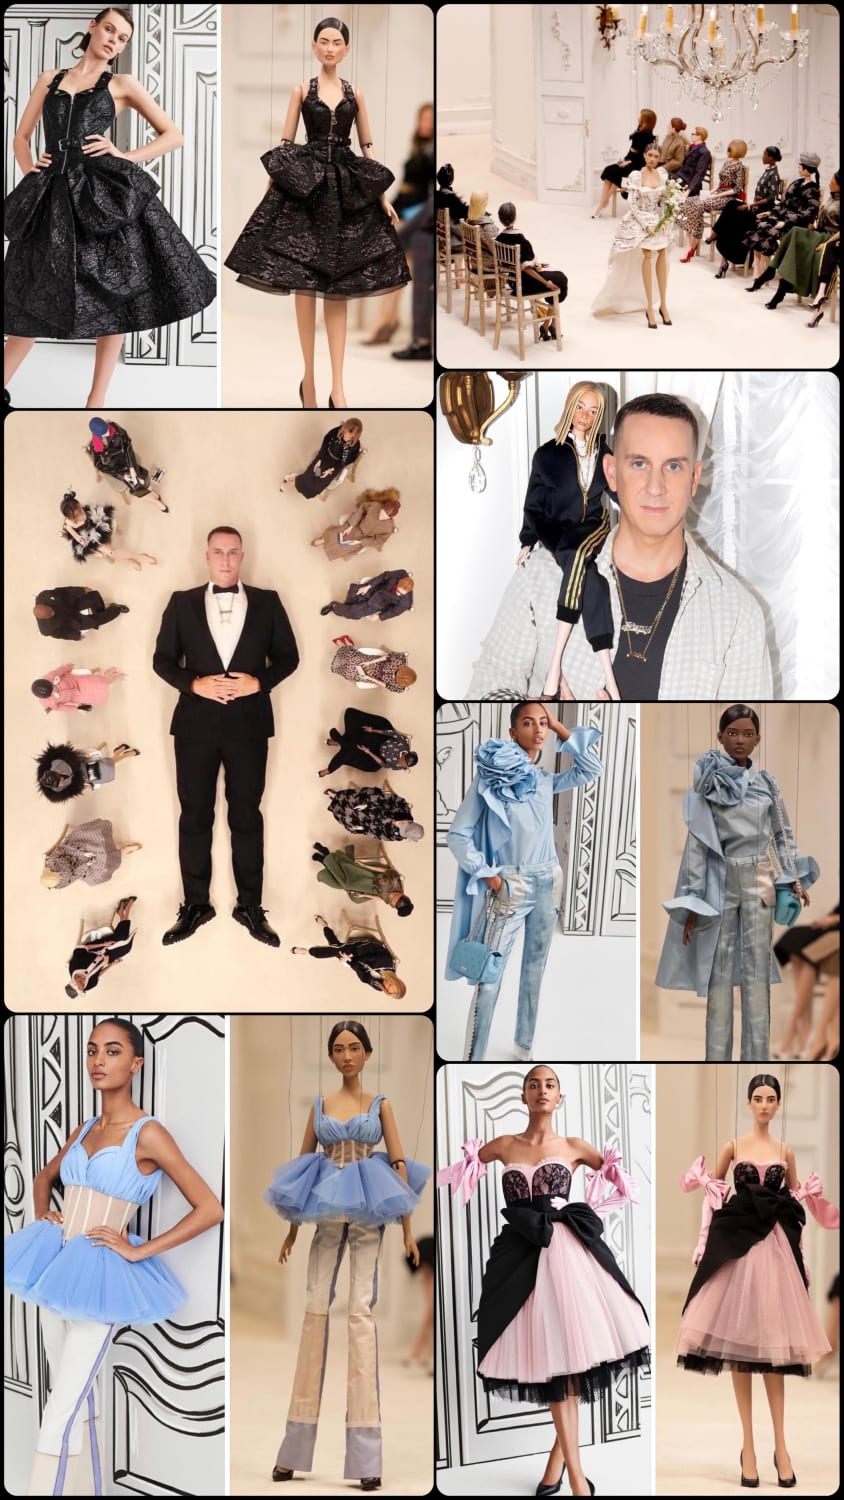 Moschino spring/summer 2021 fashion show used marionettes instead of real models due to COVID-19. Designer Jeremy Scott for scale.